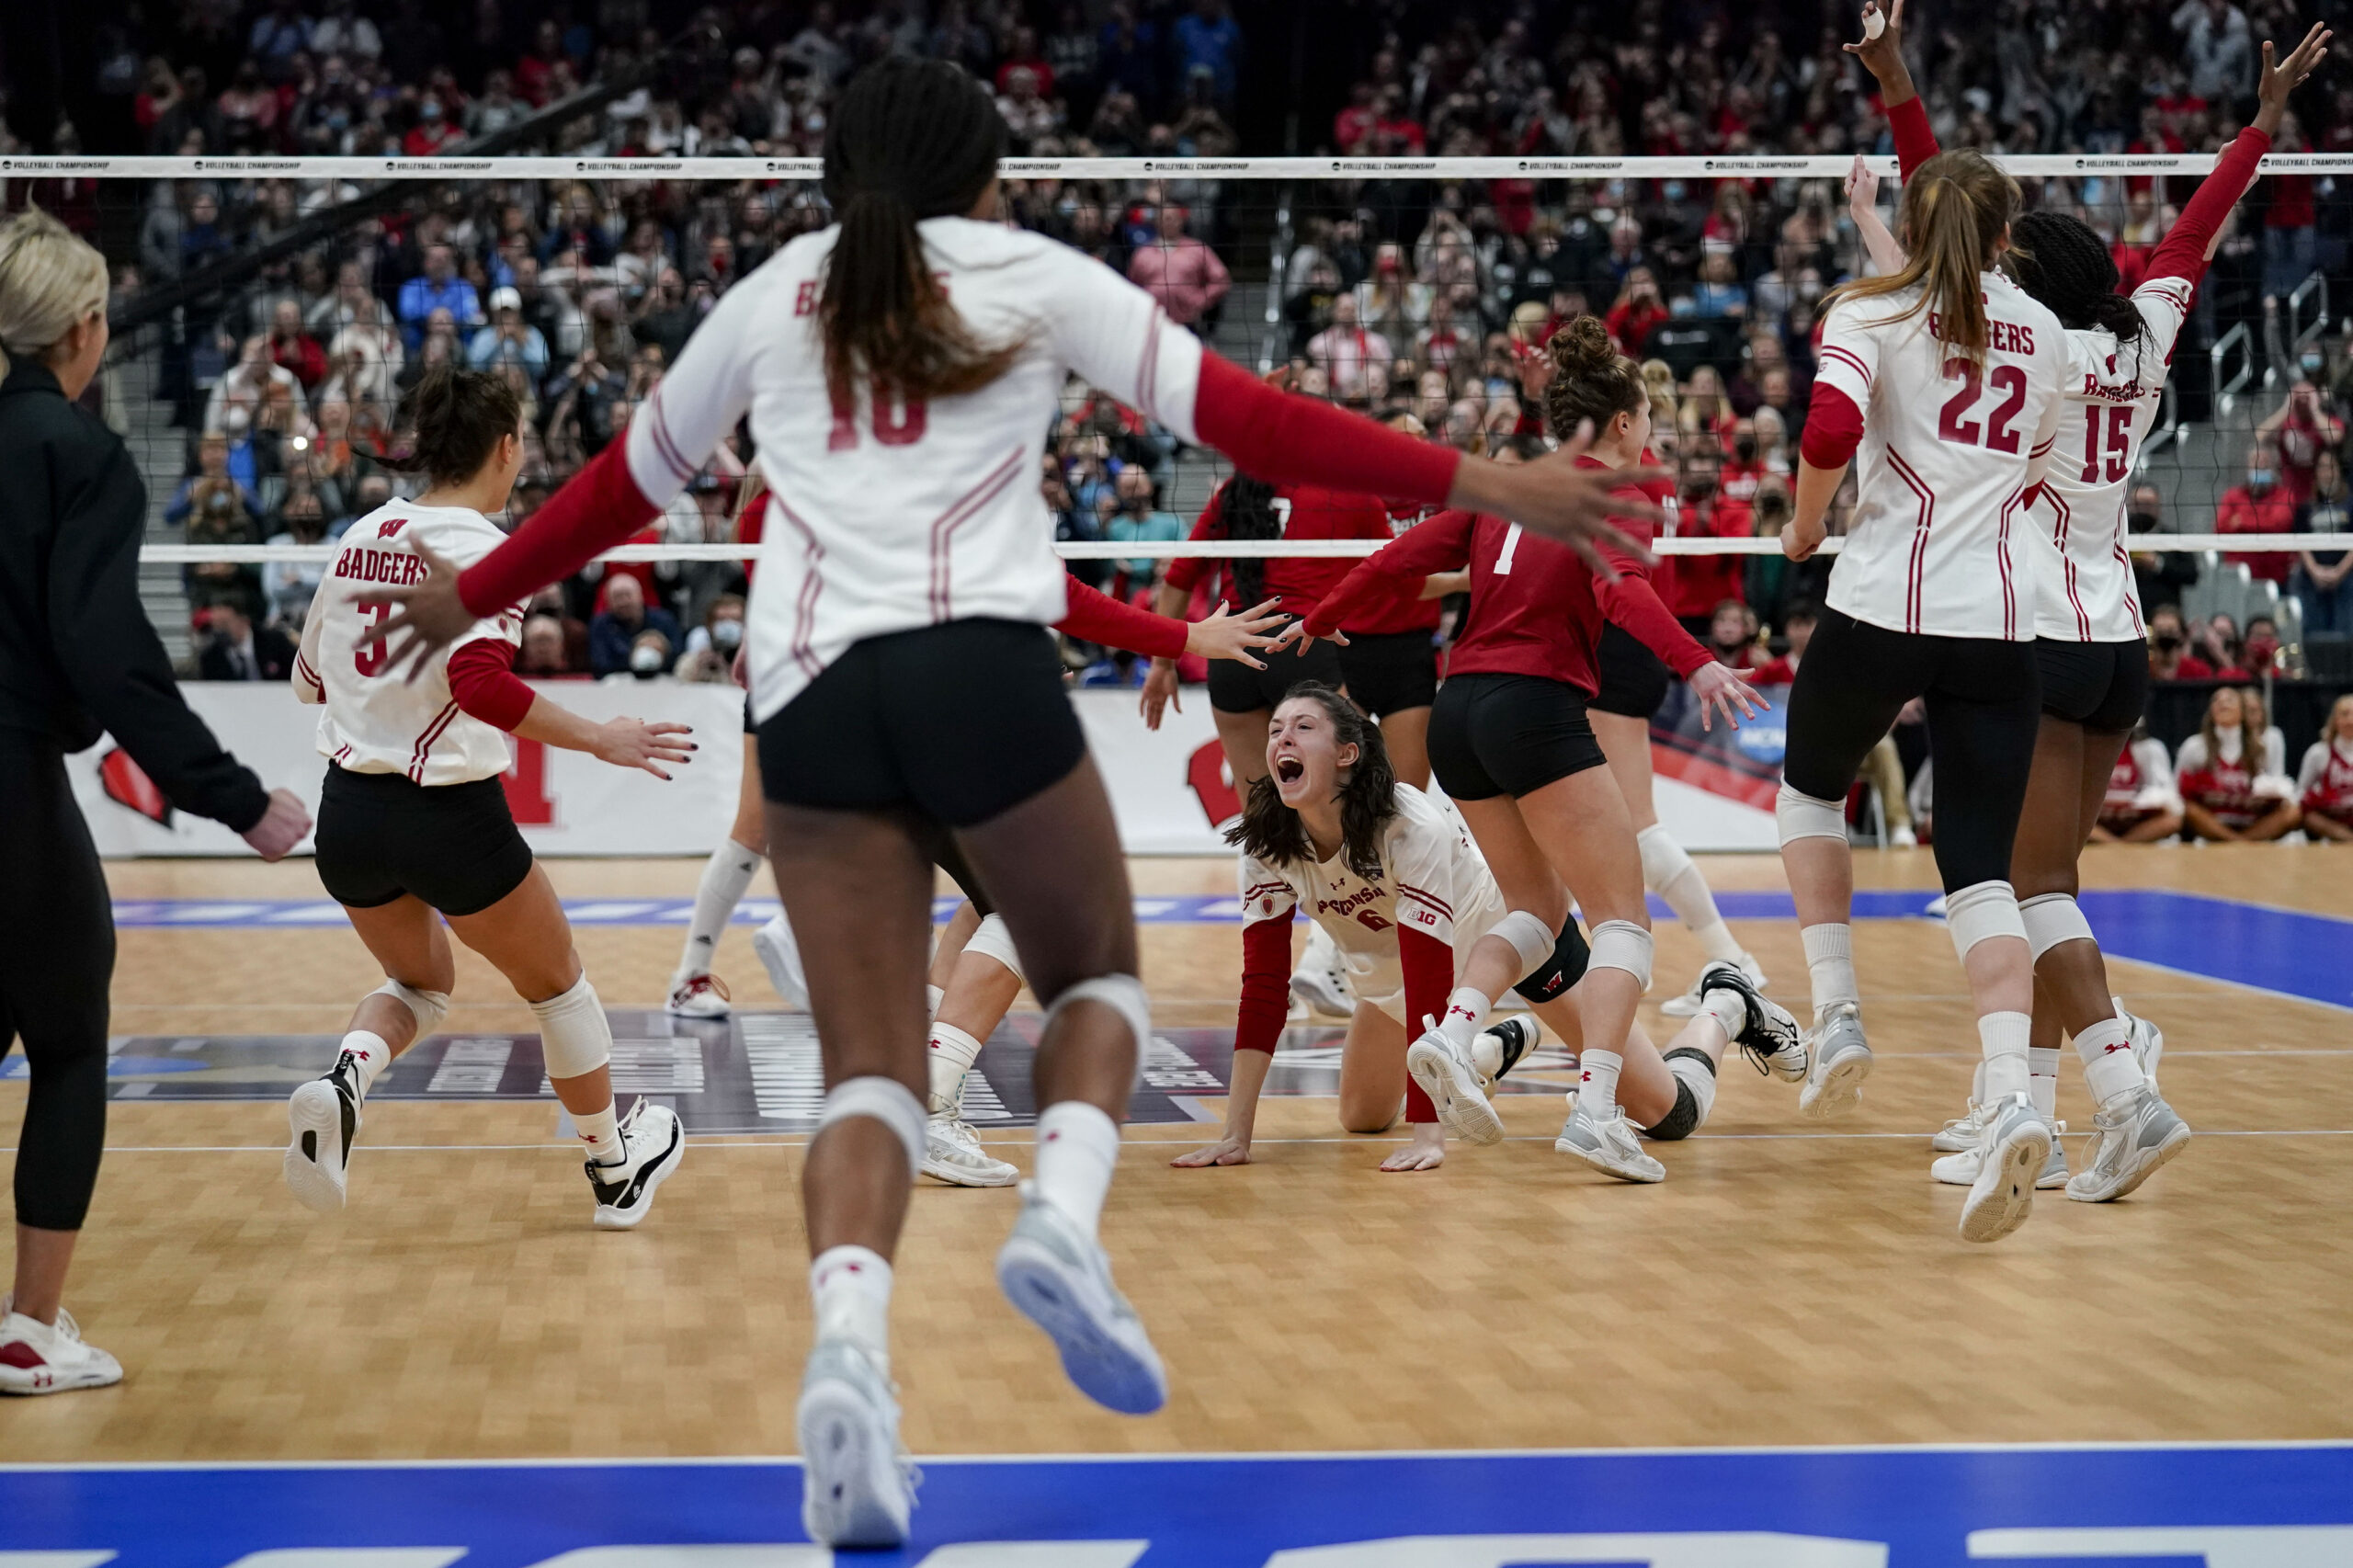 Wisconsin women's volleyball players celebrate after winning the NCAA title.